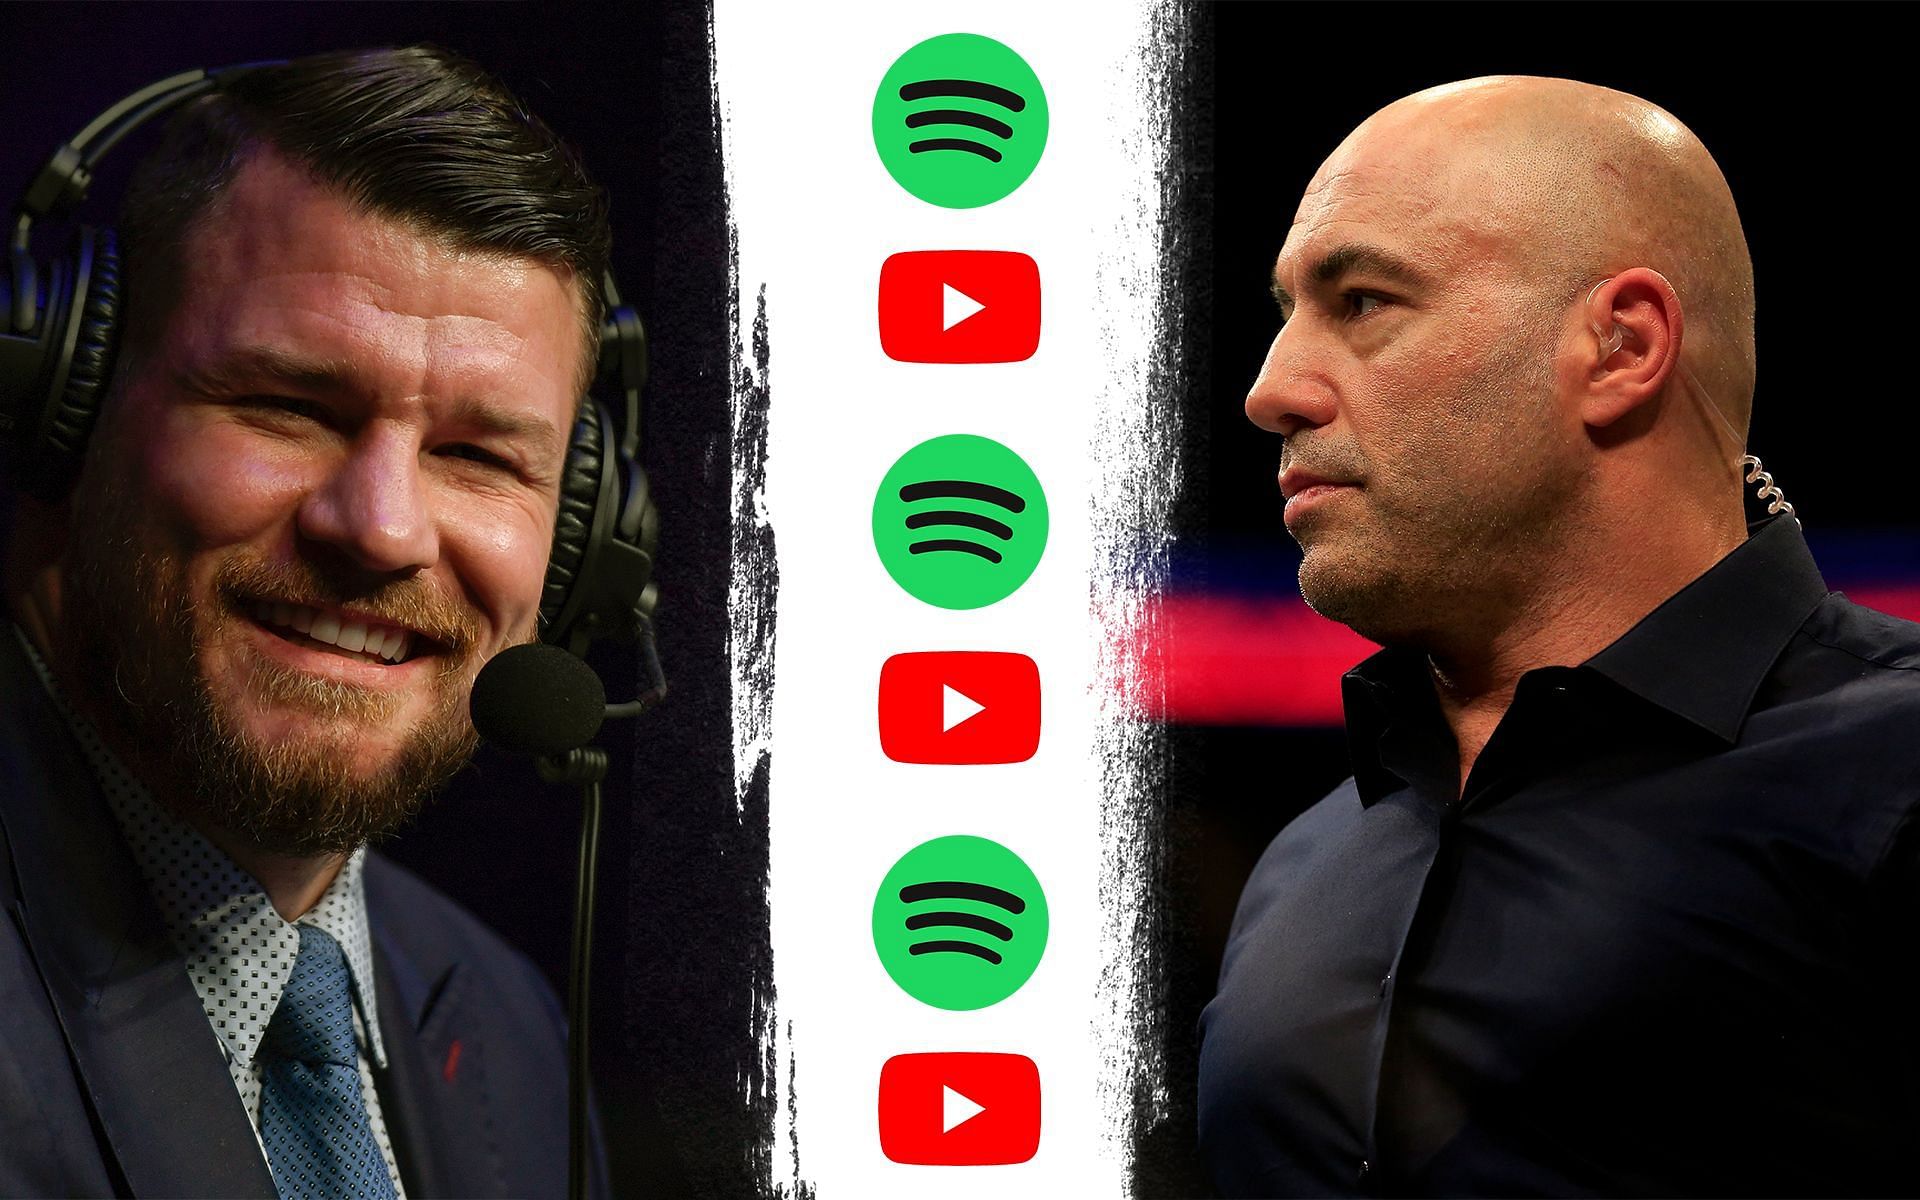 Michael Bisping gives his thoughts on the situation surrounding Joe Rogan (images via: Getty)